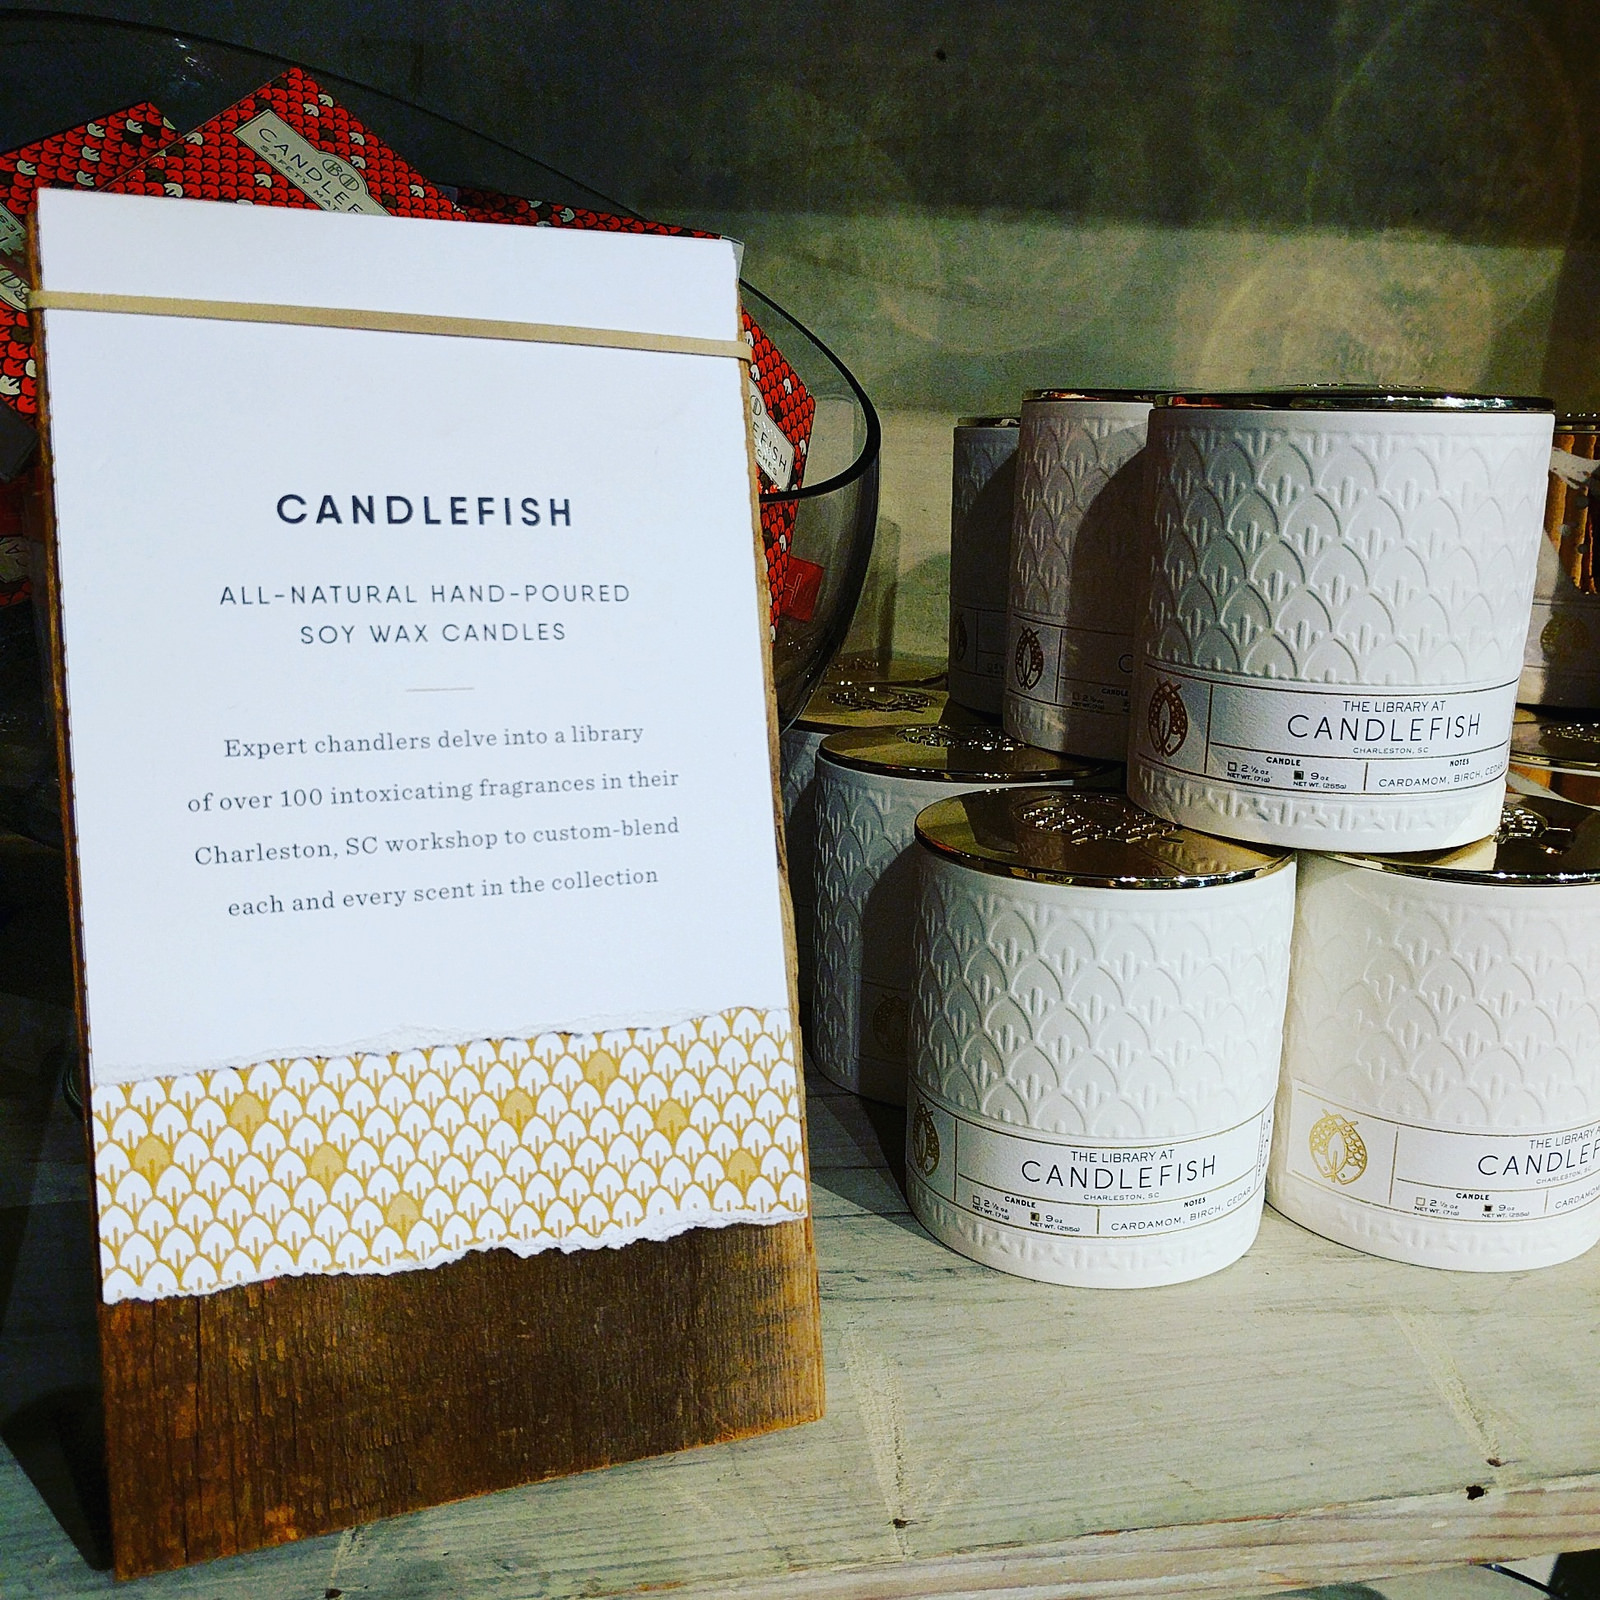 Handpoured soy candles from Candlefish at Anthropologie